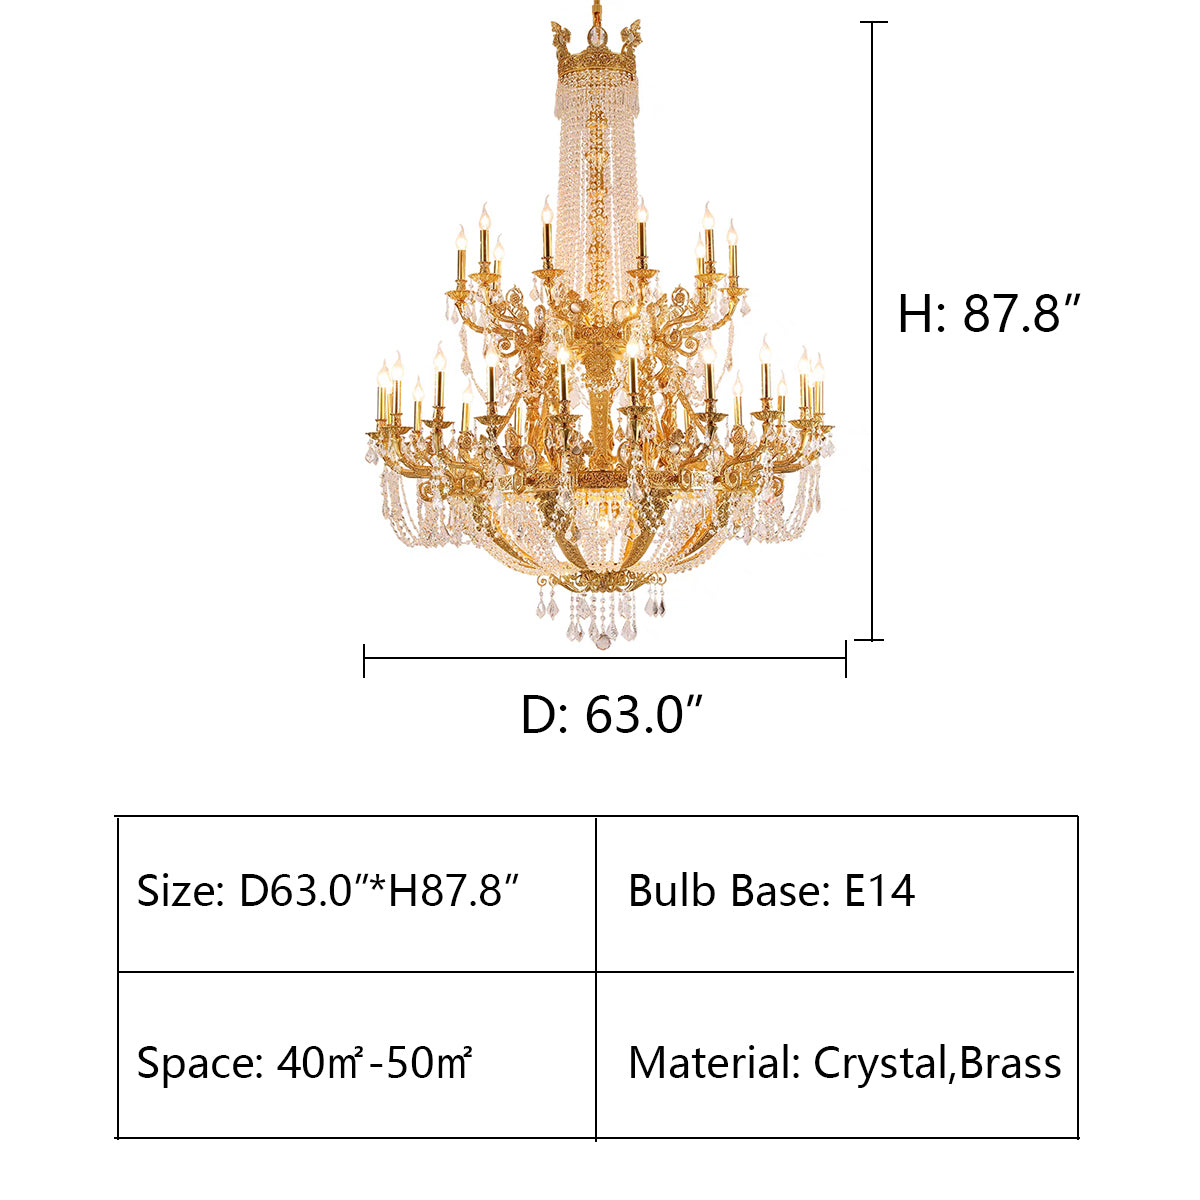 D63.0"*H87.8" chandelier,chandeliers,pendant,crystal,metal,clear crystal,candle,branch,round,raindrop,teardrop,extra large,oversized,large,huge,big,round,living room,luxury,dining room,modern,foyer,stairs,hallway,entrys,hotel lobby,duplex hall,loft,gold,brass,copper